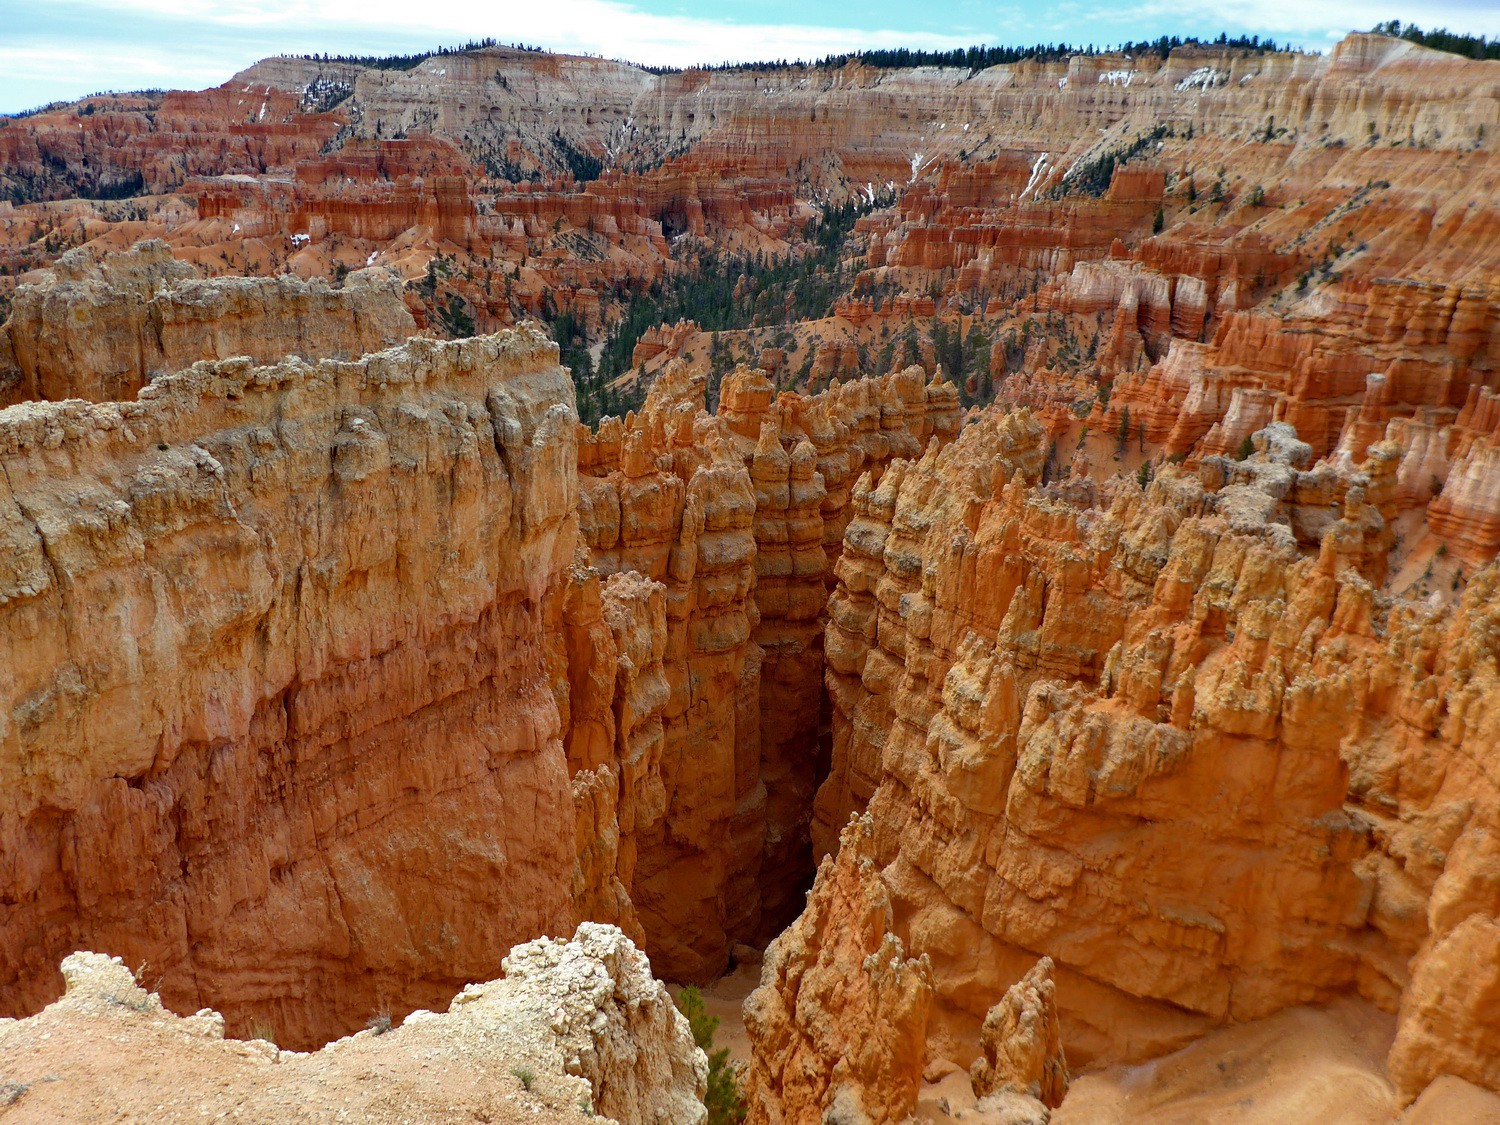 Gorges in the Bryce Canyon seen from the Navajo Loop Trail